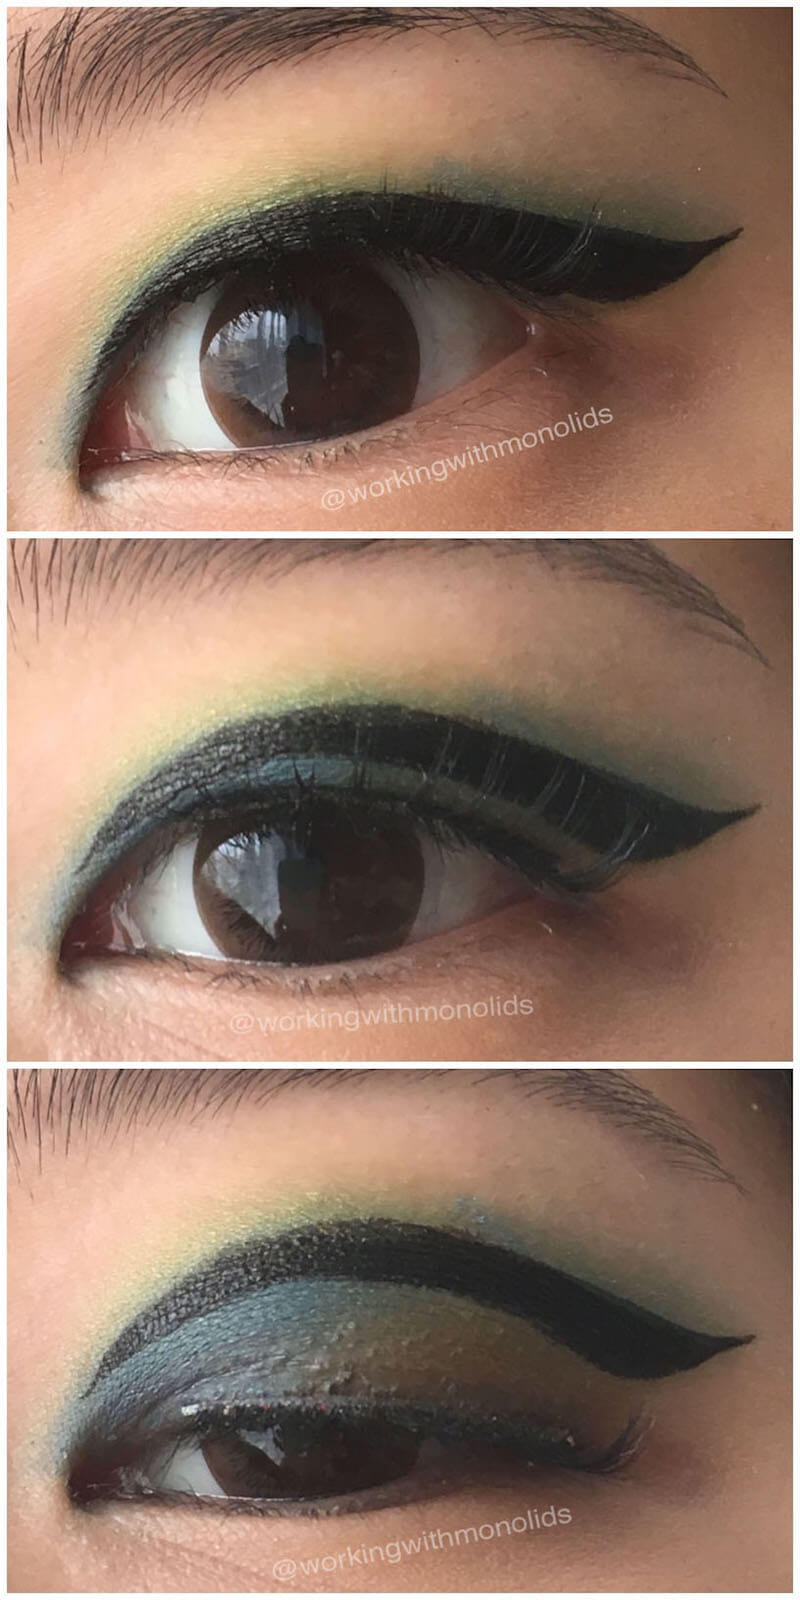 A colorful, creative eye look for monolids that demonstrates the placement of eyeliner and eyeshadow.